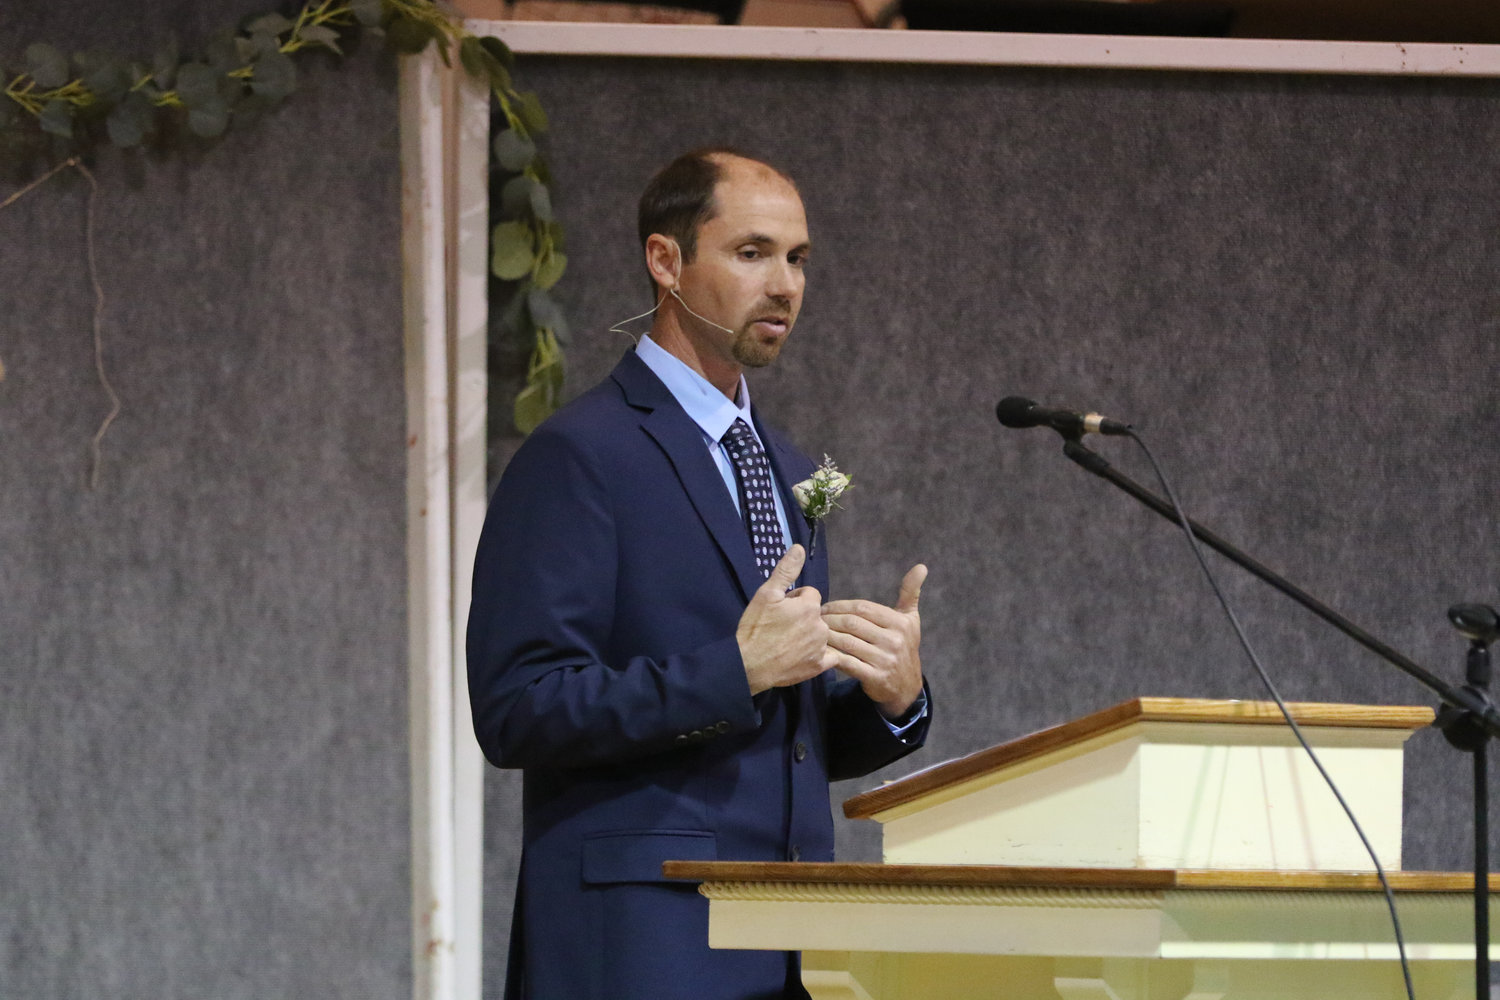 Graduation speaker Darryl Swantz shares some words during Pathway Christian School's graduation ceremony on May 16, 2021.